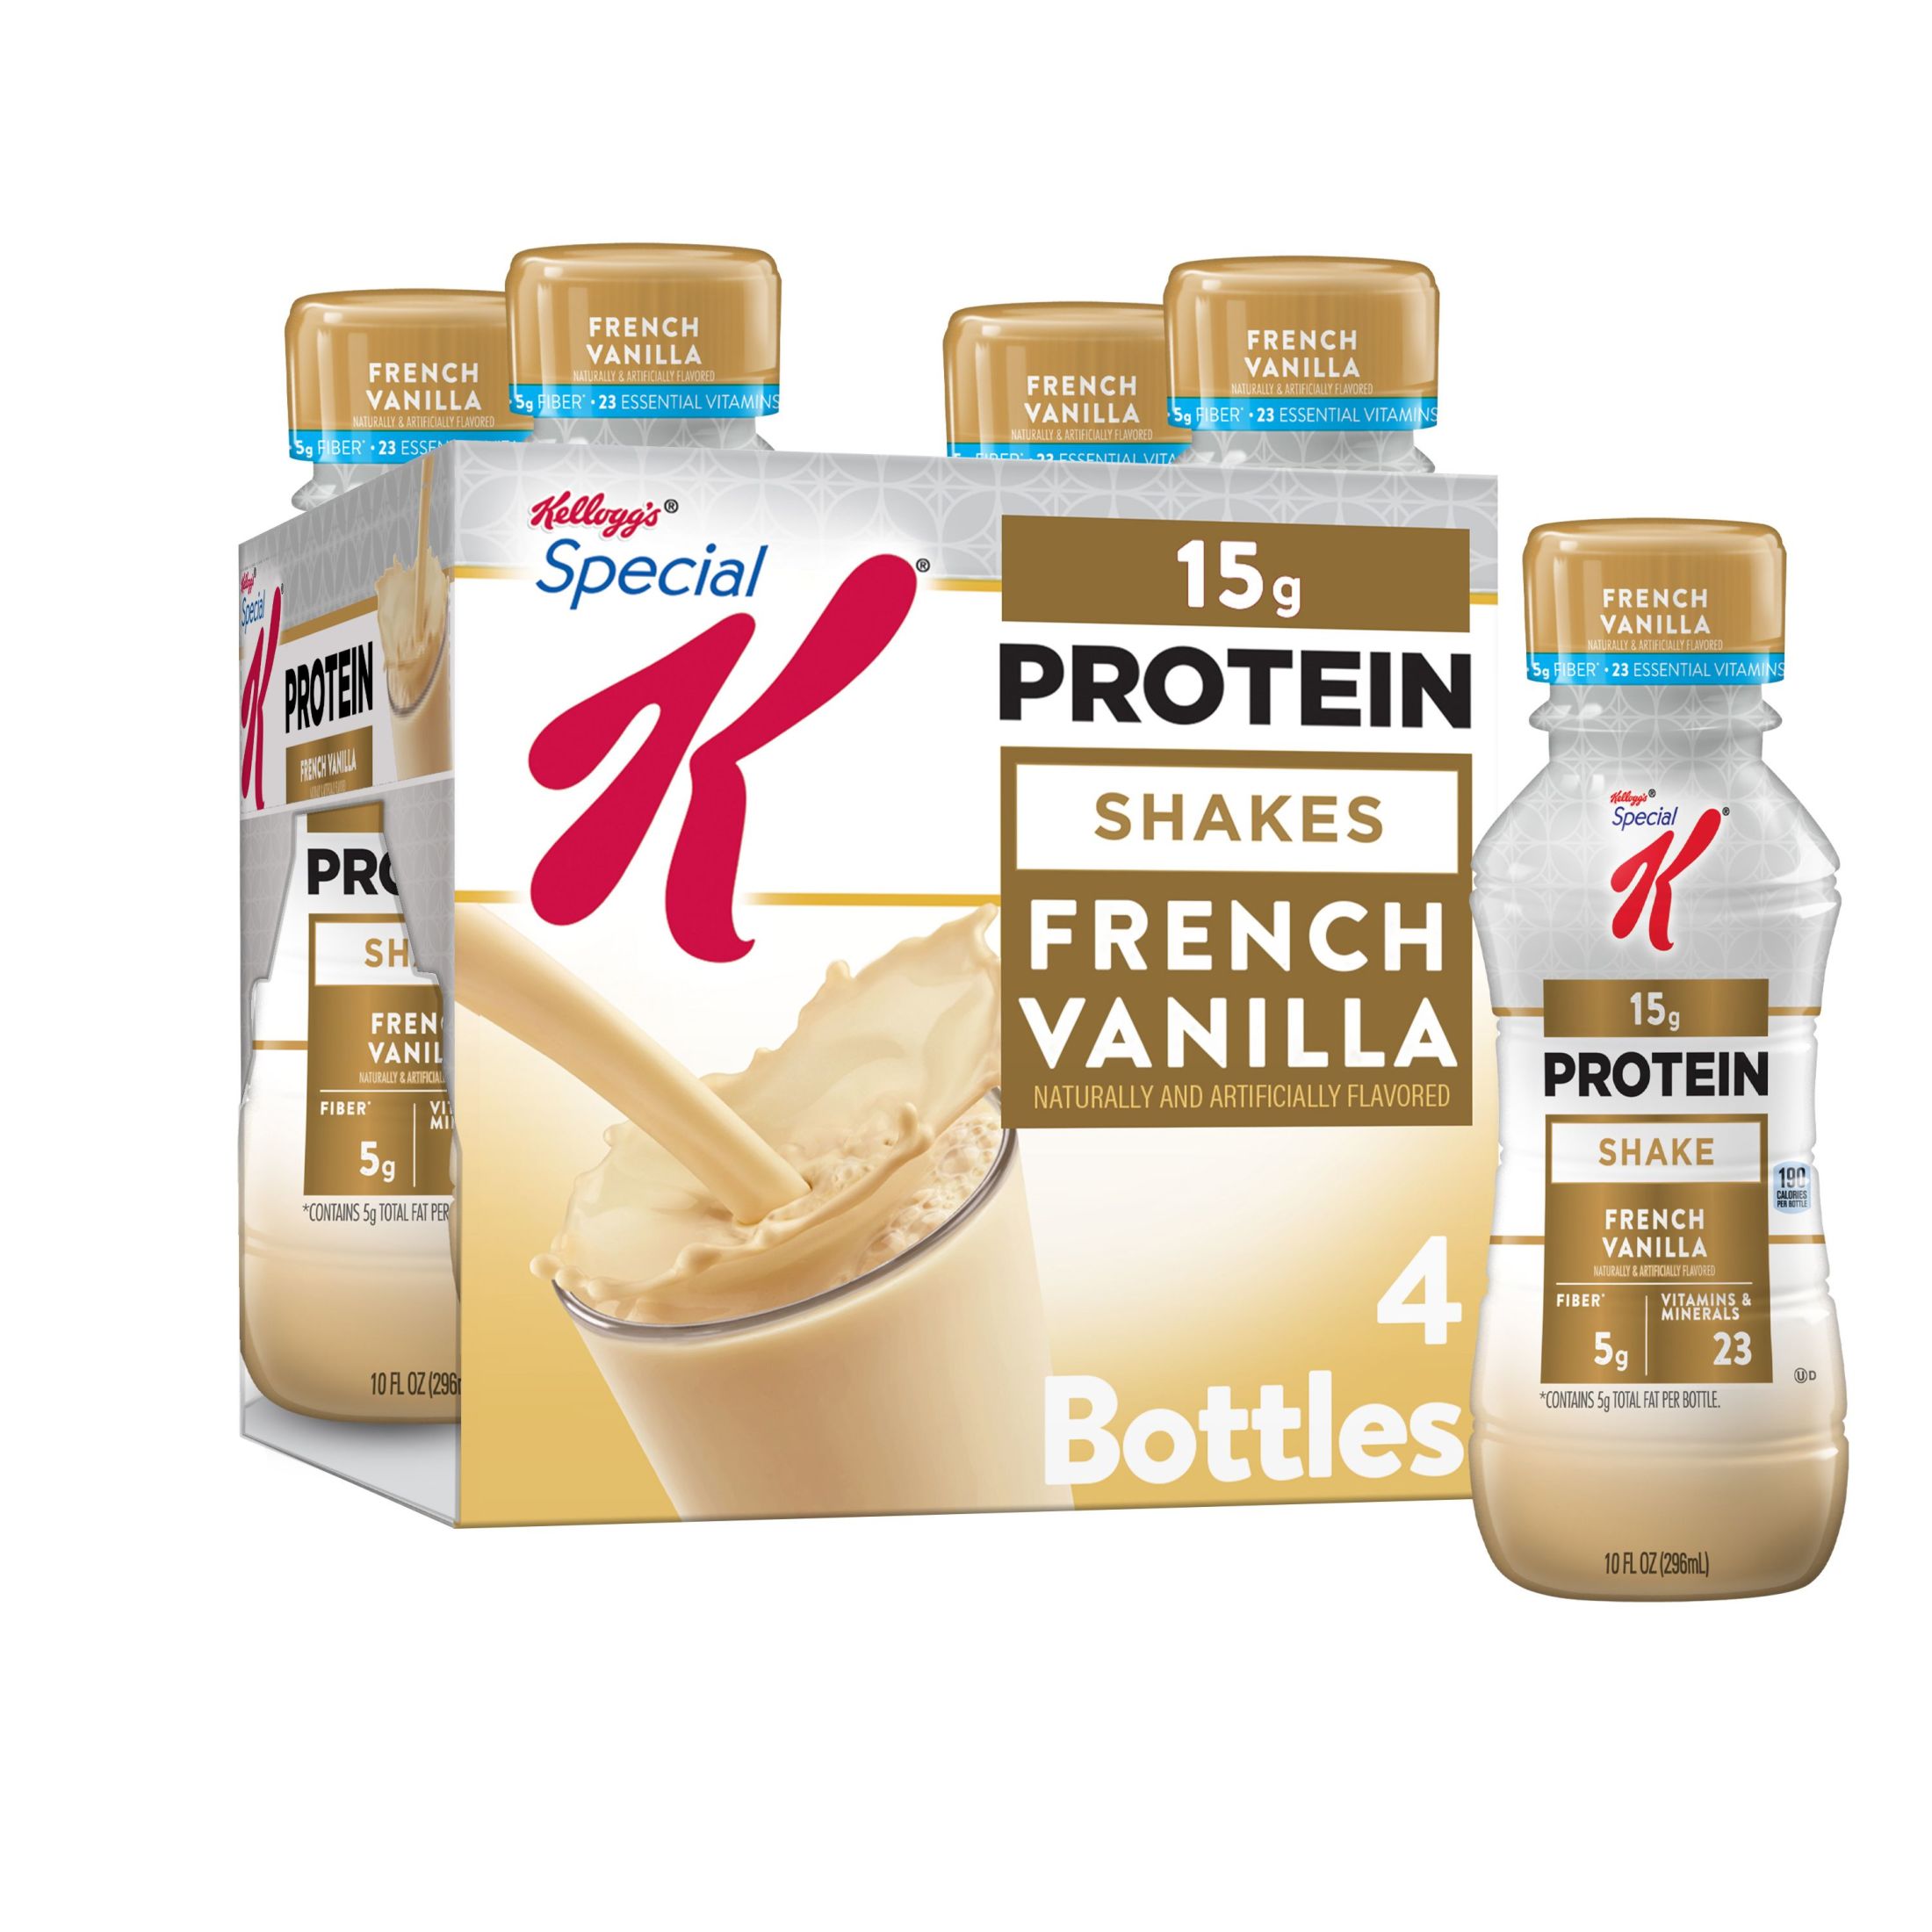 Kellogg's Special K French Vanilla Protein Shakes, Gluten Free, 40 oz, 4 Count - image 1 of 14